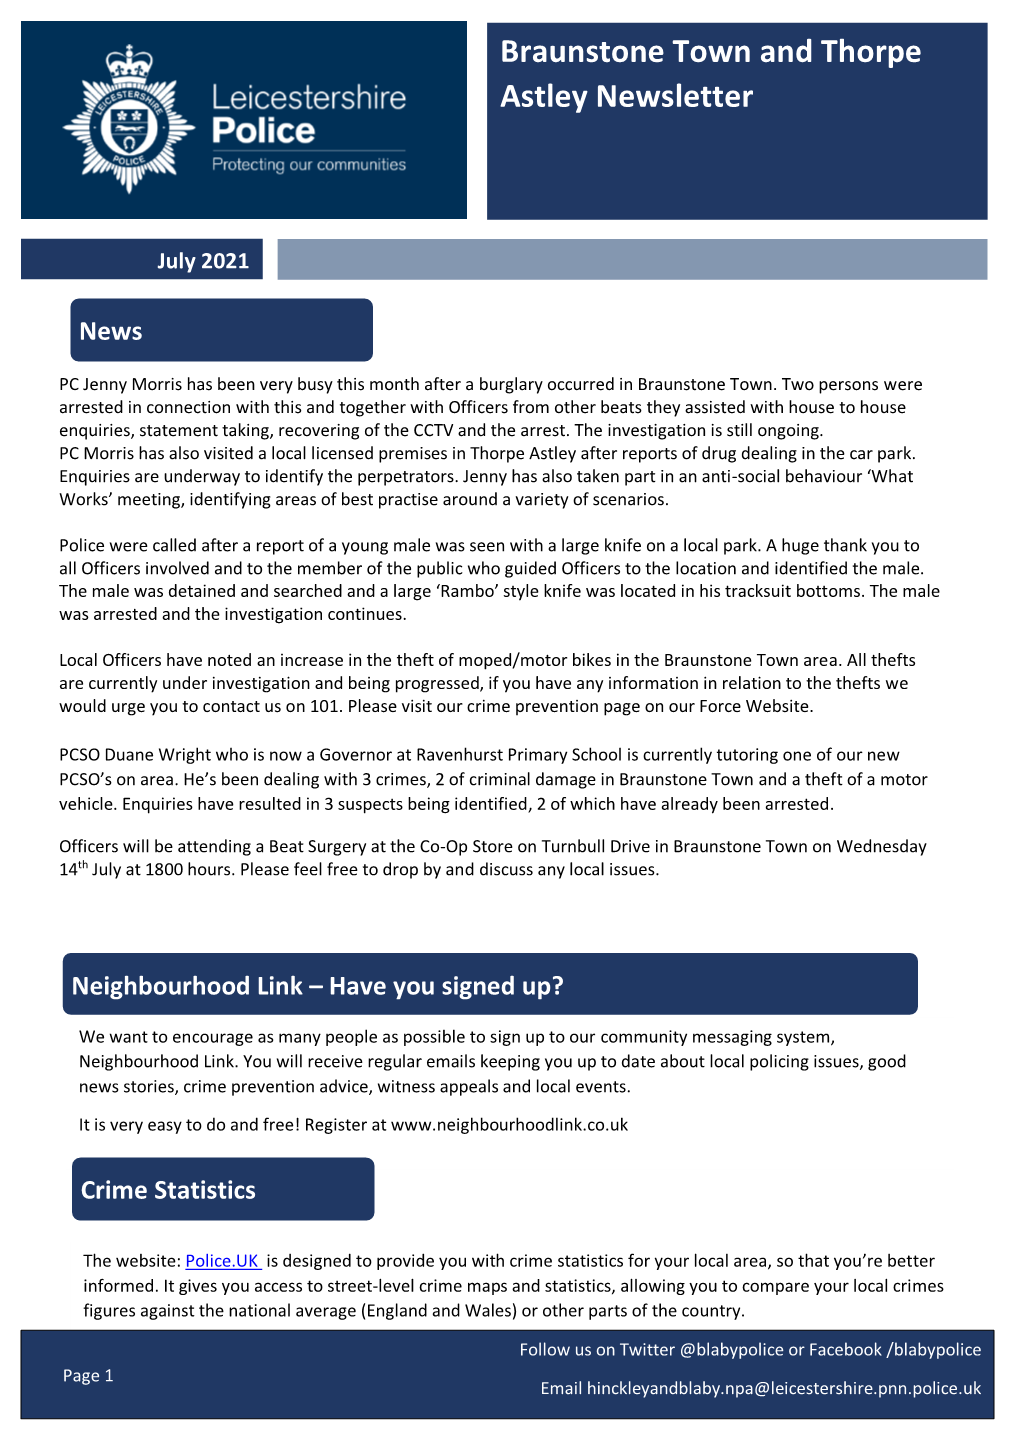 Braunstone Town and Thorpe Astley Newsletter